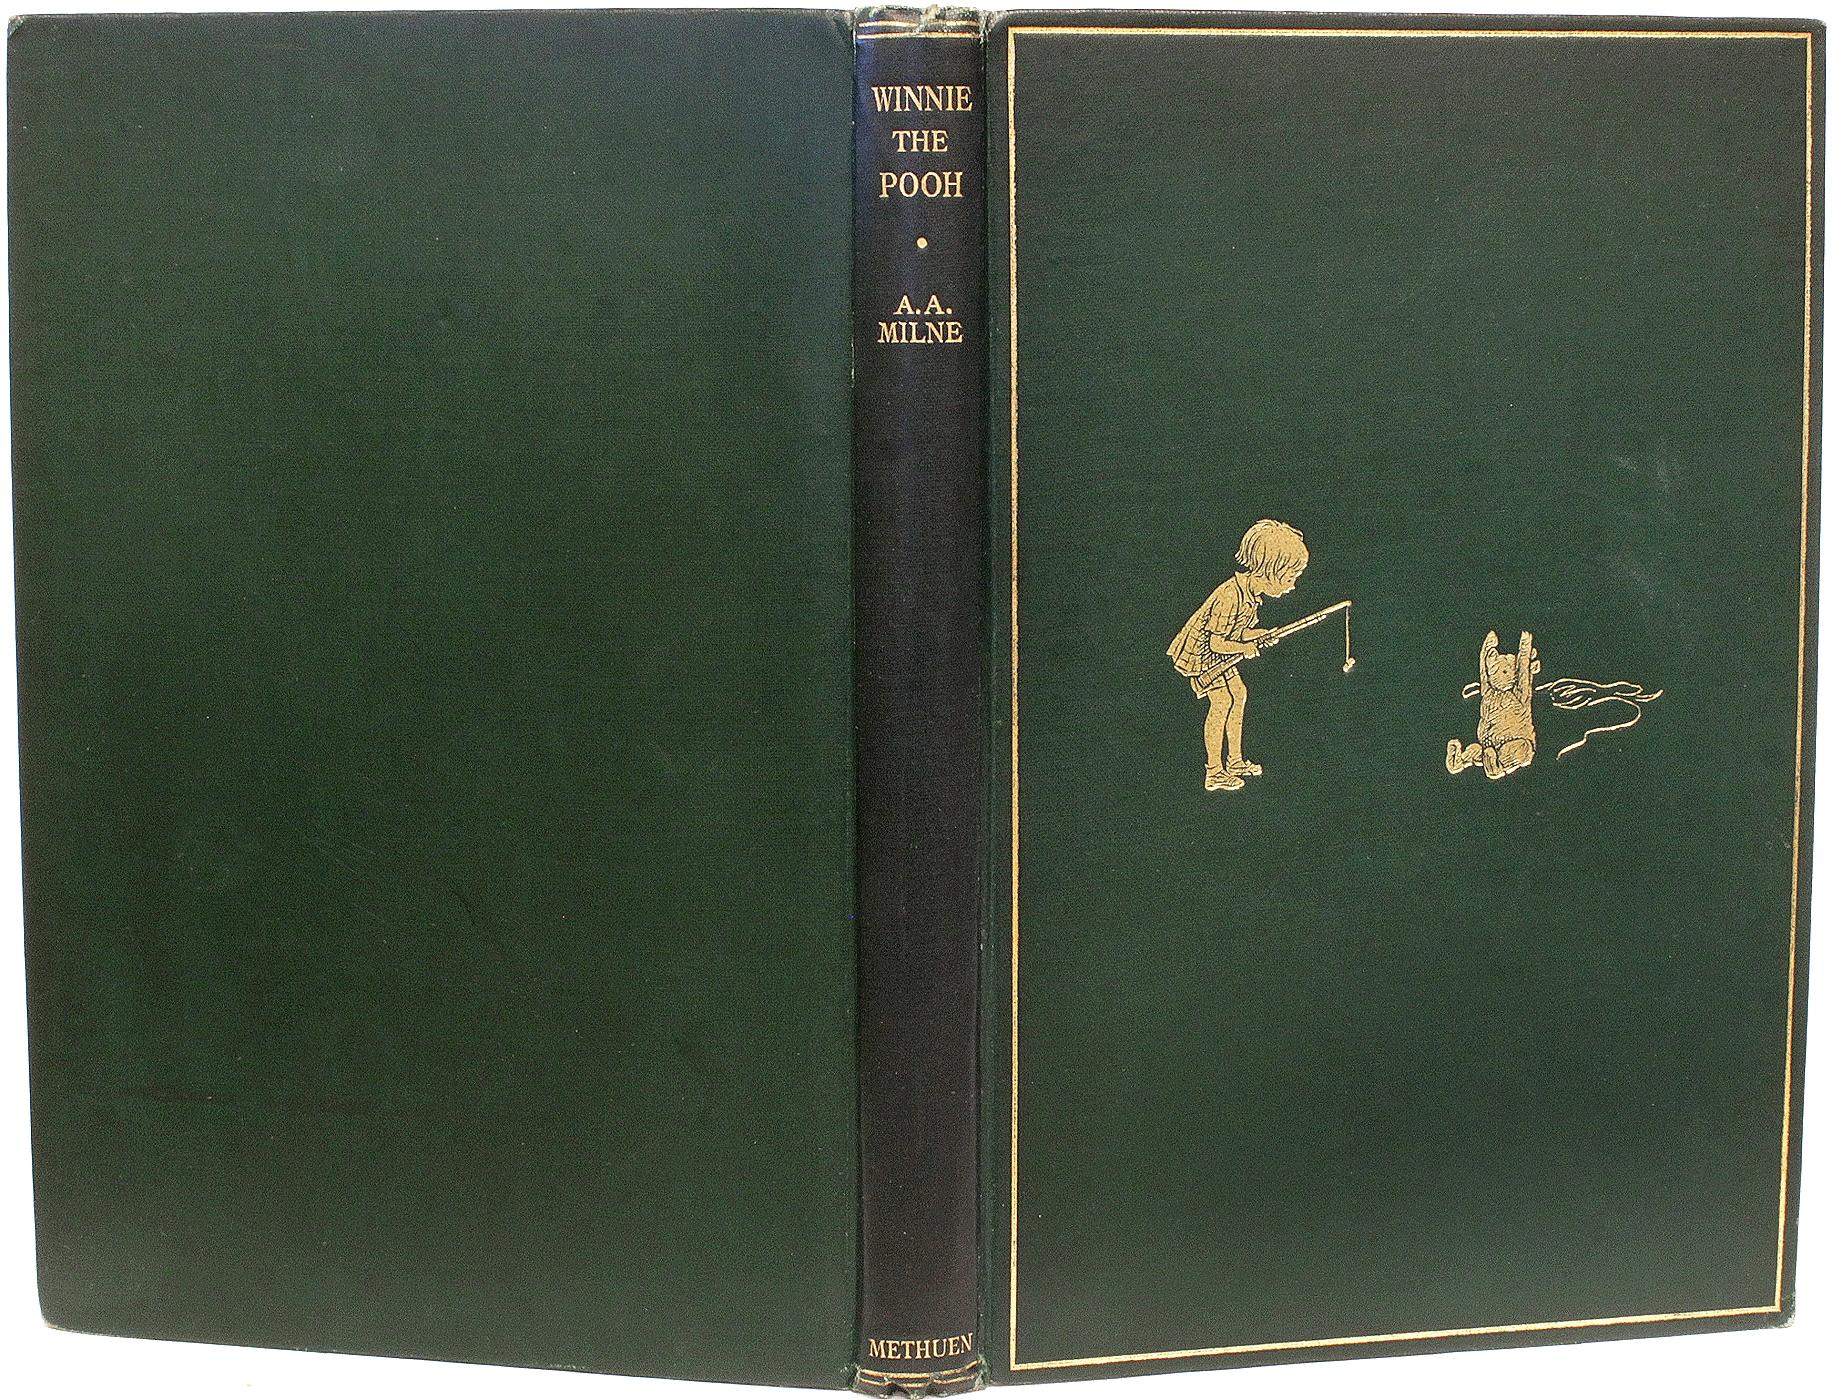 AUTHOR: MILNE, A. A.

TITLE: Winnie The Pooh.

PUBLISHER: London: Methuen & Co. Ltd., 1926.

DESCRIPTION: FIRST EDITION FIRST PRINTING. 1 volume, illustrated by E. H. Shephard. Bound in the publisher's original gilt stamped green cloth, top edge